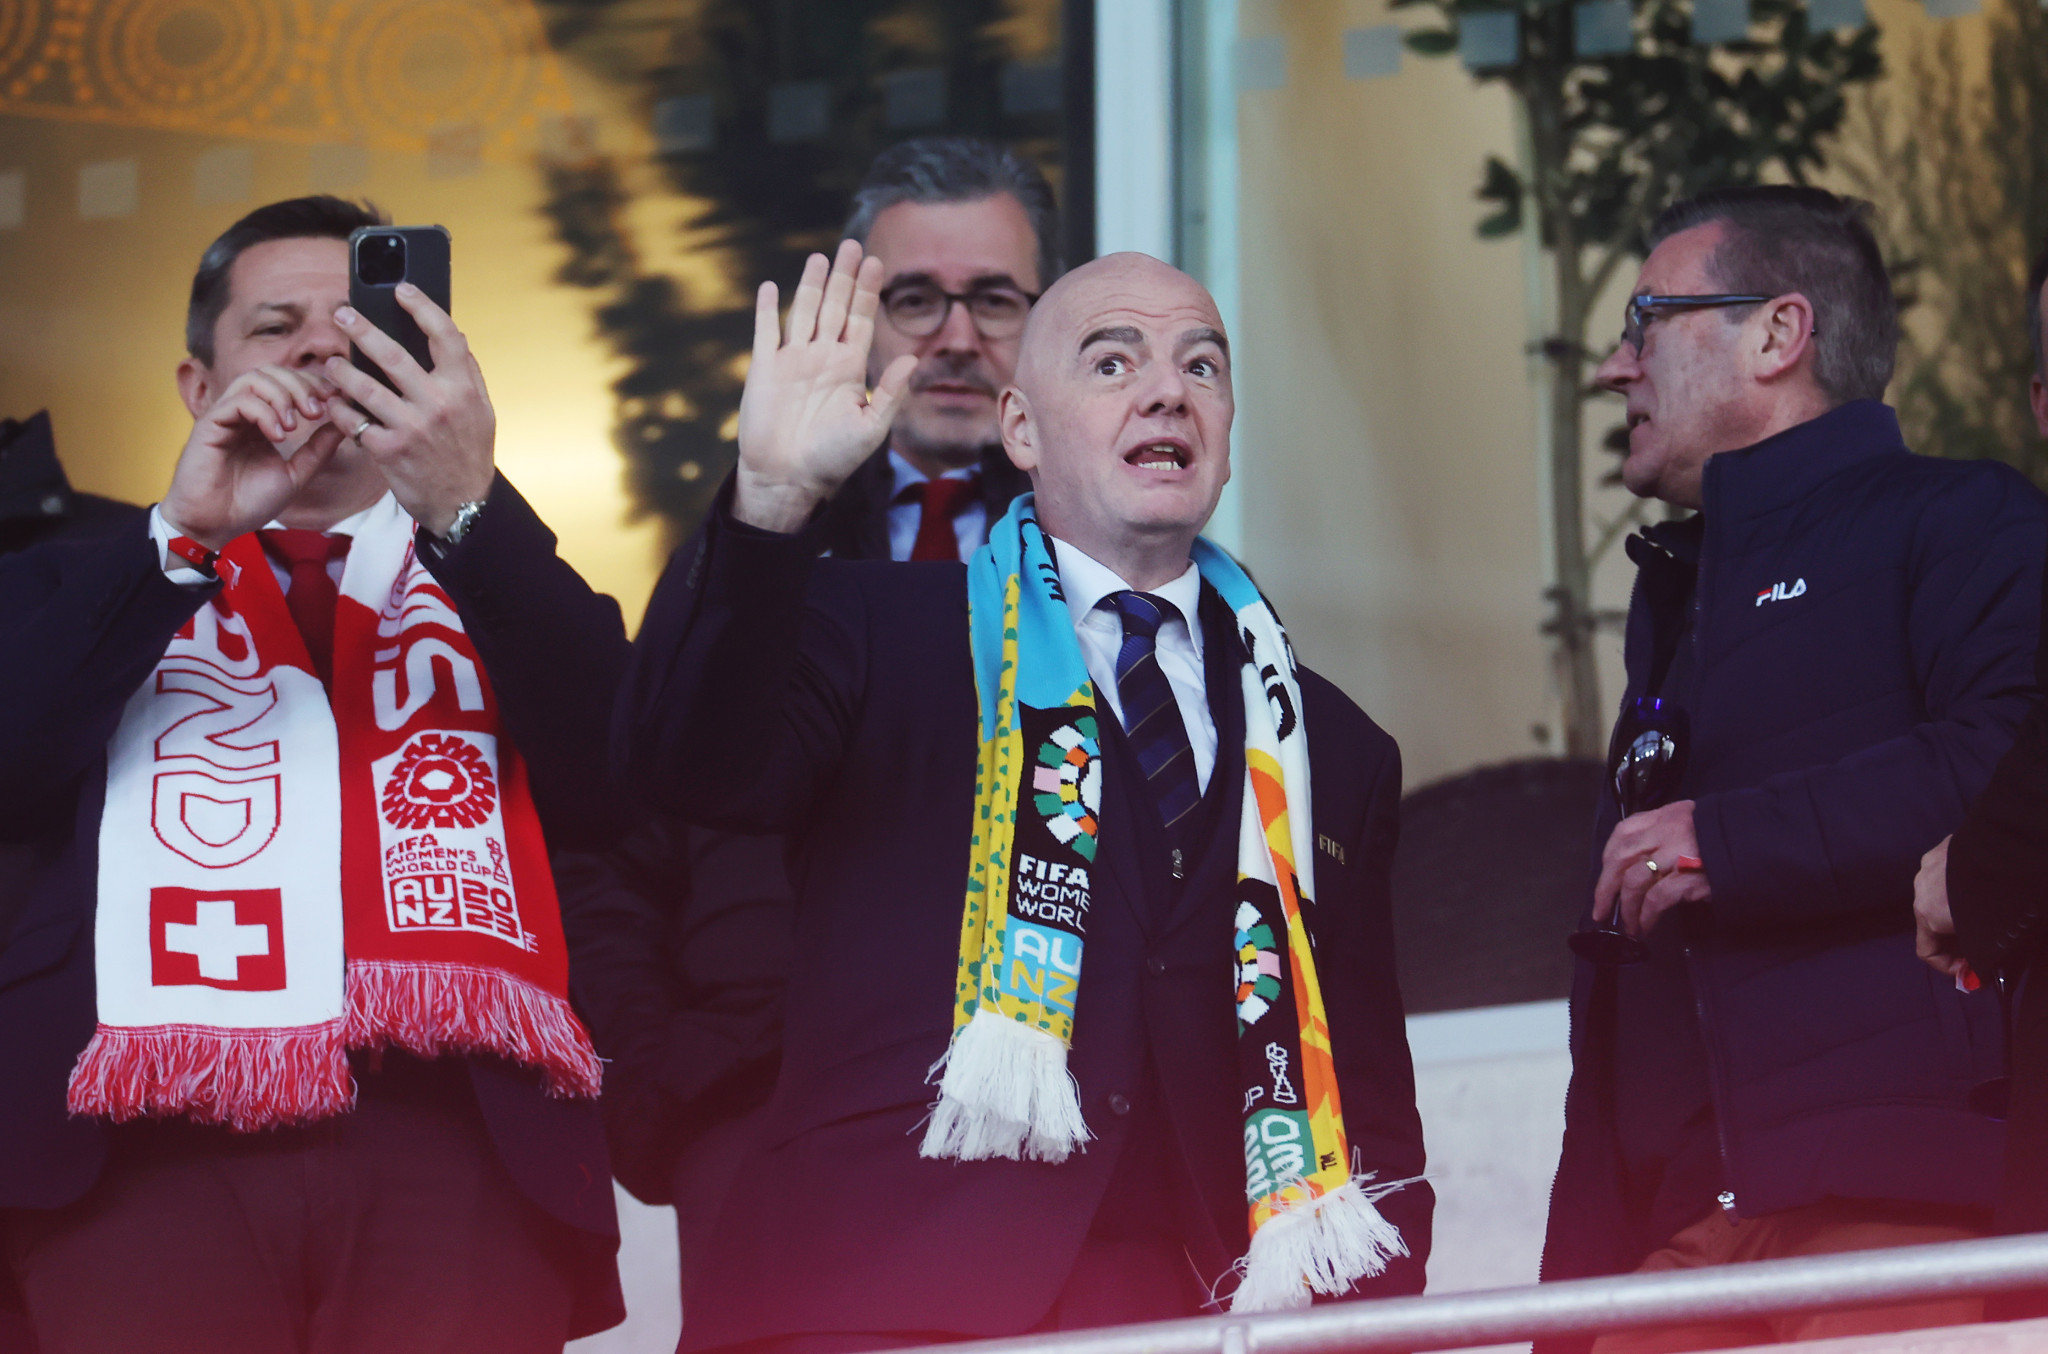 Infantino leaves FIFA Women's World Cup in stark contrast to presence at men's event